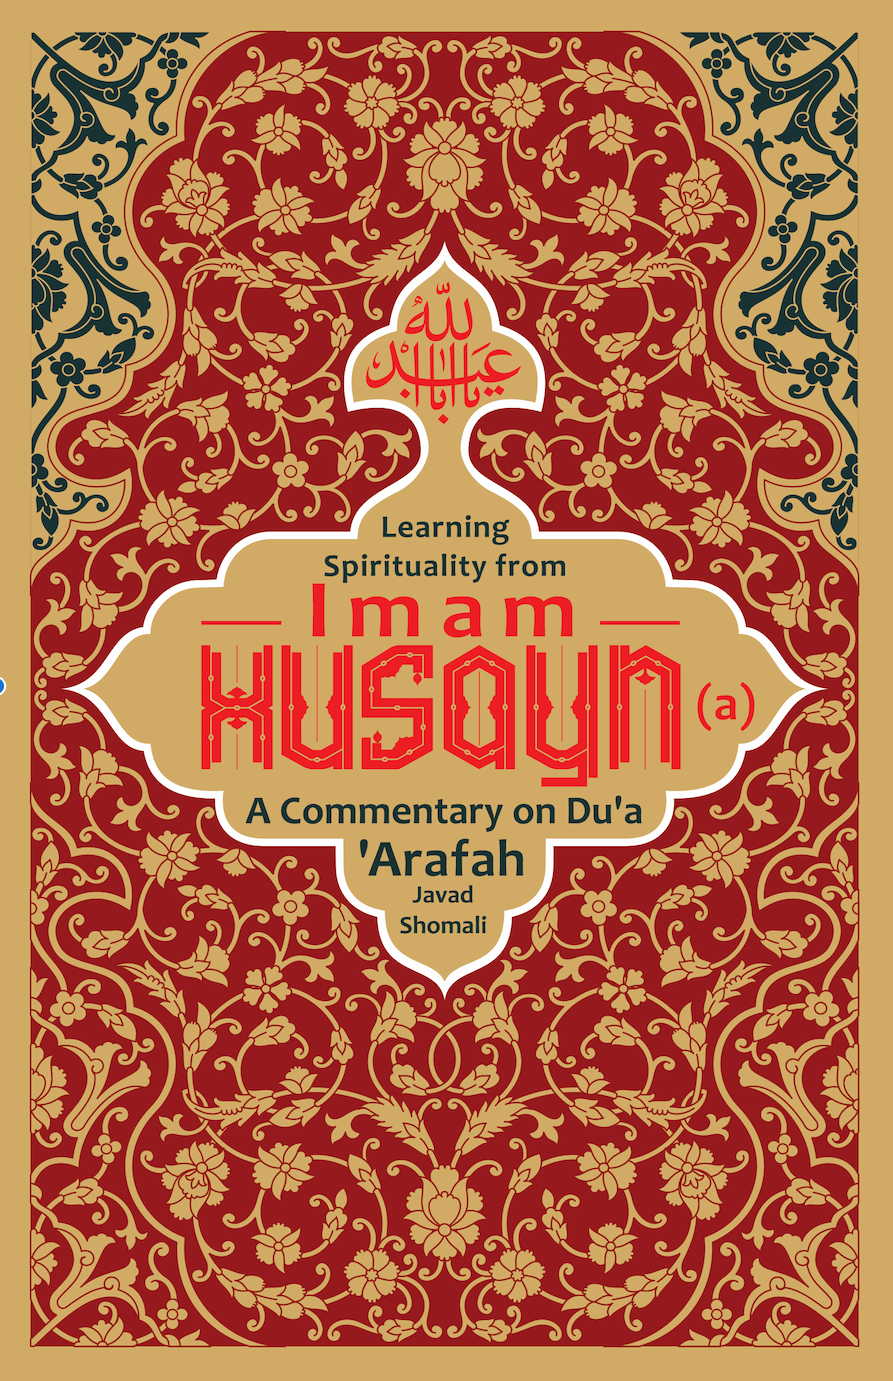 Learning Spirituality from Imam Husayn | A Commentary on Du'a 'Arafah